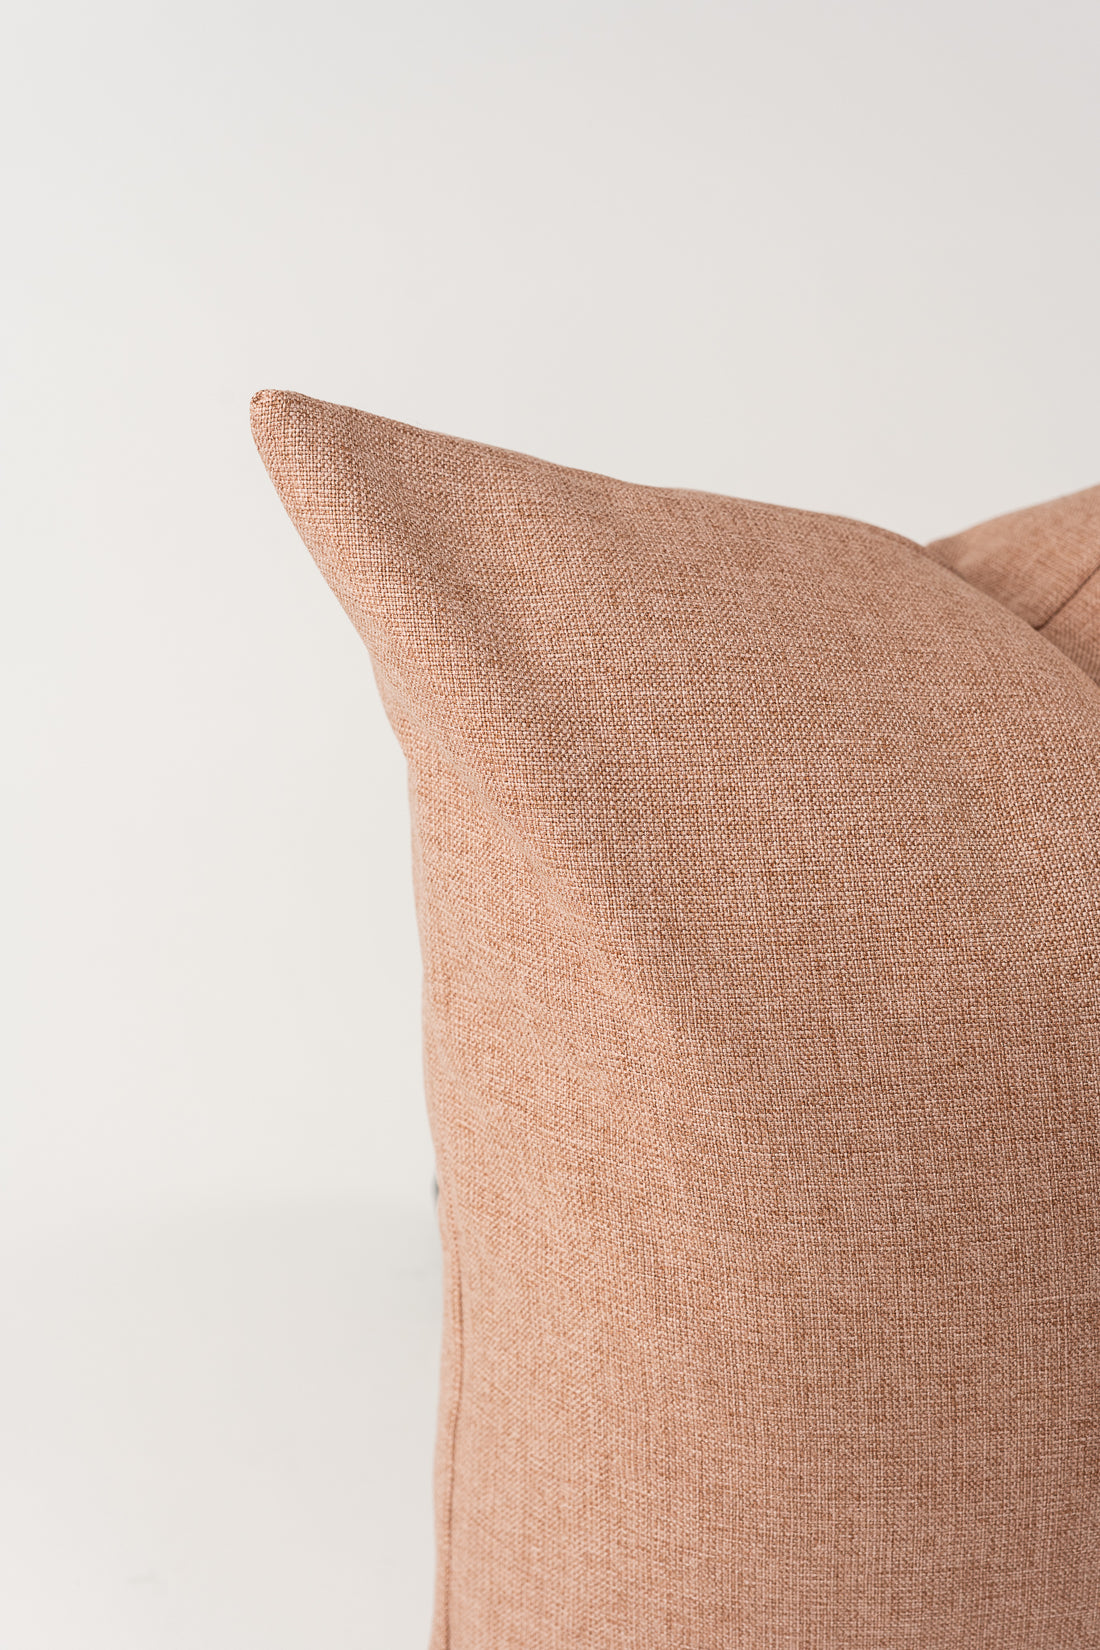 Kindred Cushion - Linen - Pink